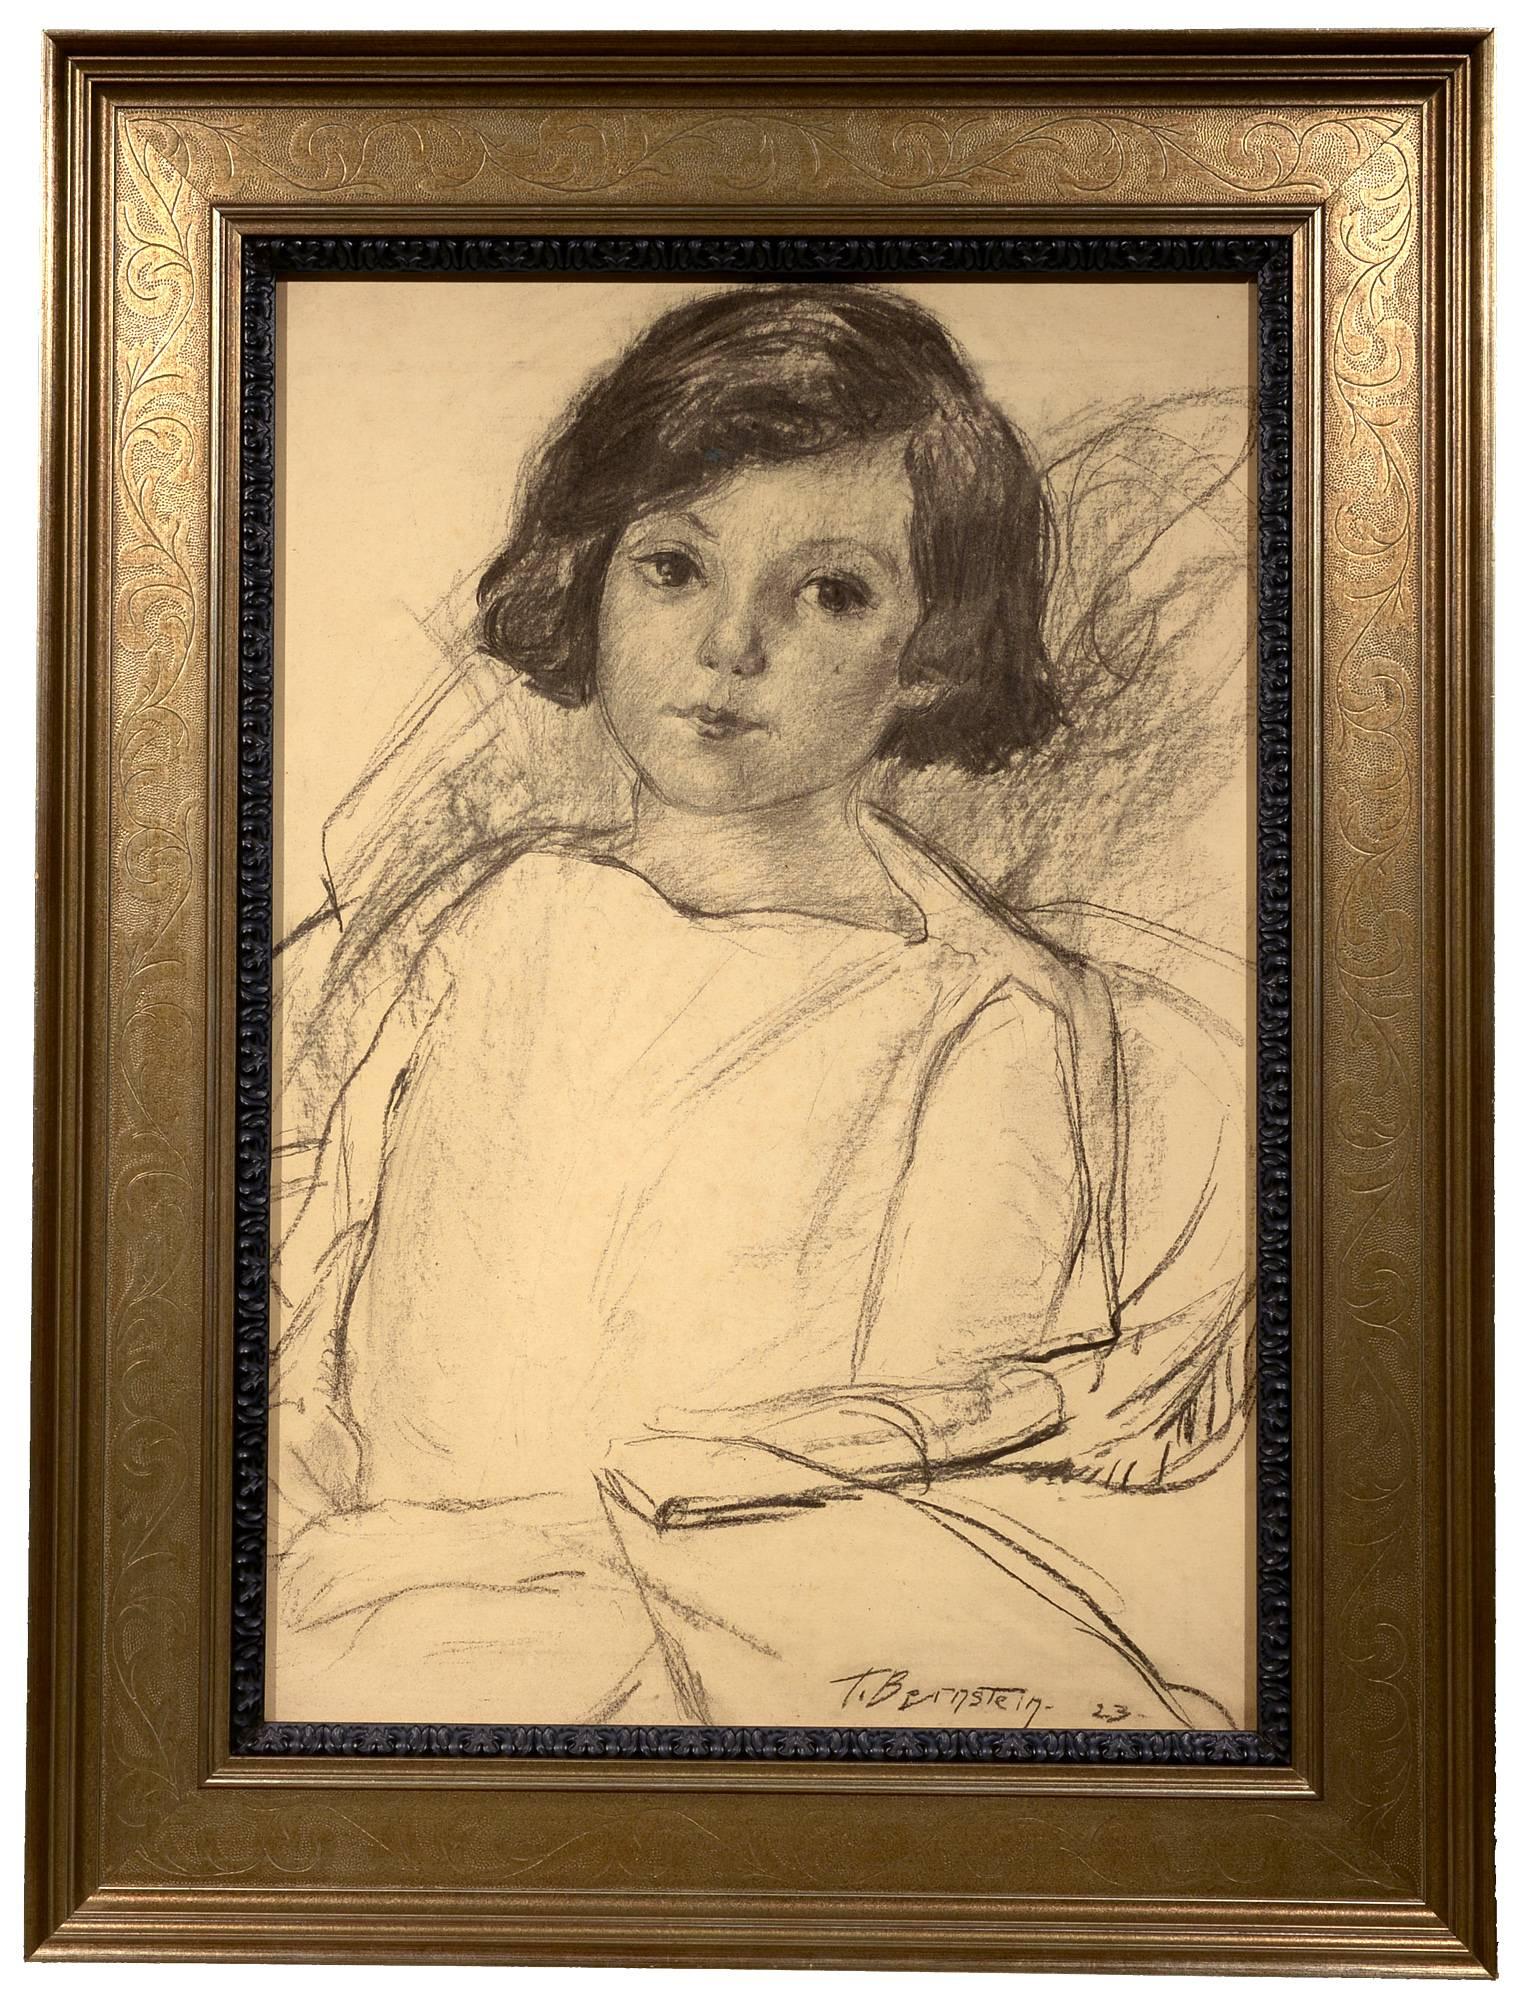 Born in Philadelphia in 1890, Theresa Bernstein showed early talent and interest in art. At the age of seventeen, she won a Board of Education scholarship to attend the Philadelphia School of Design for Women, now the Moore College of Art, studying